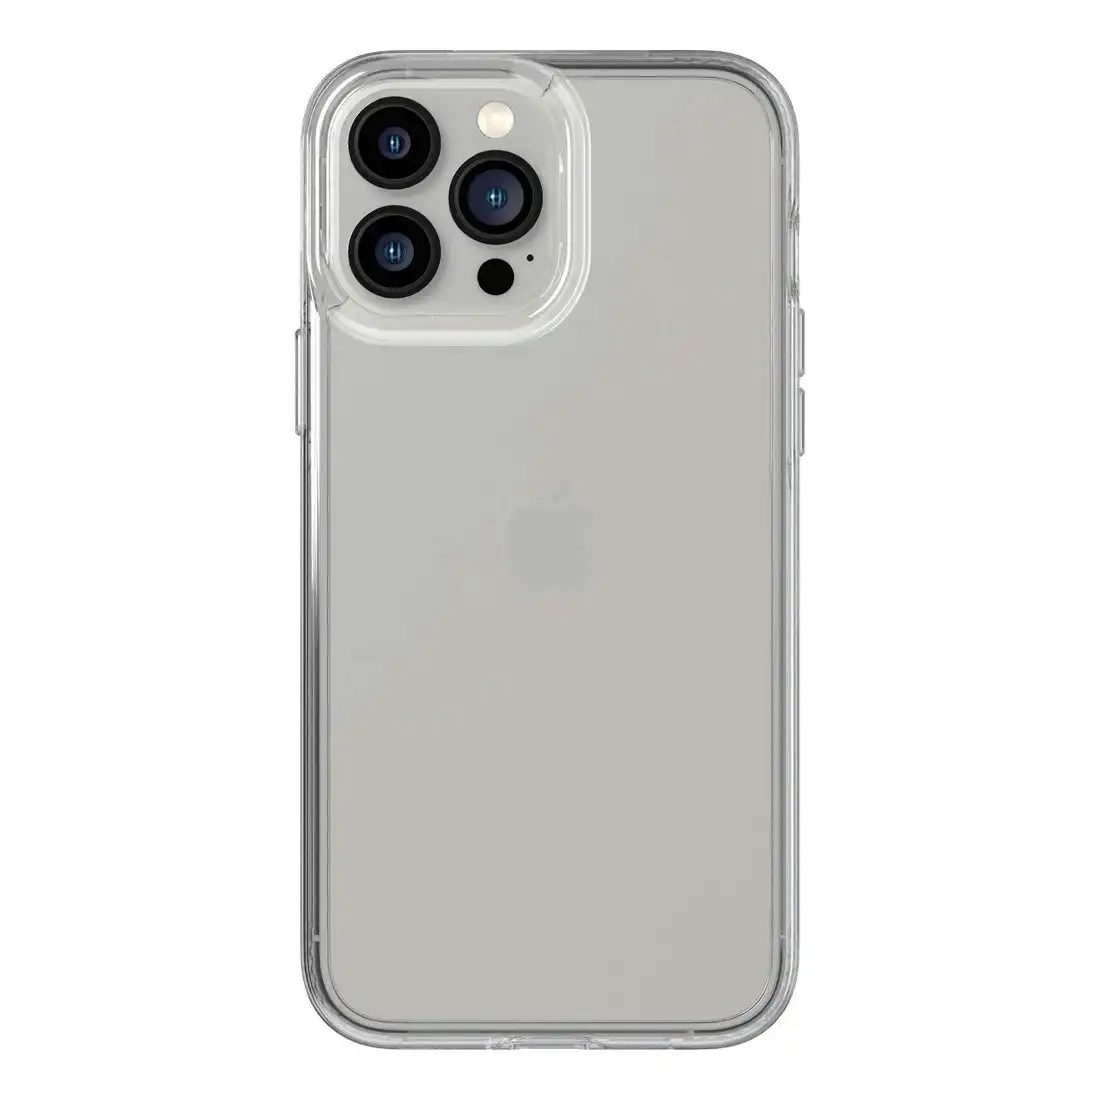 Tech21 EvoClear Case for iPhone 13 Pro Max T21-8980 - Clear